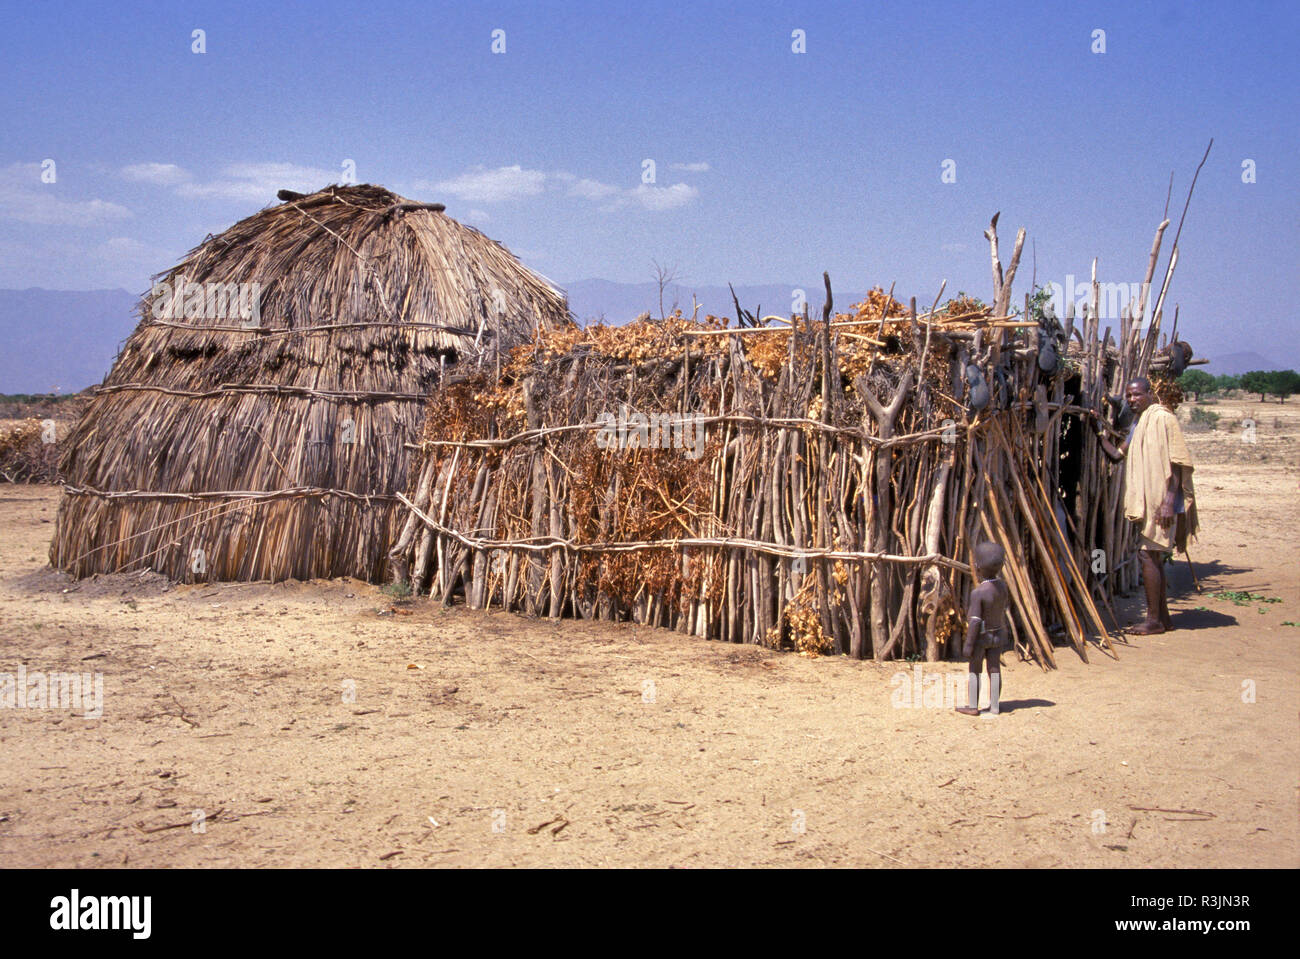 Africa, Ethiopia, Omo region. A small child stands by a typical stick and grass Aerbora tribe house. Stock Photo